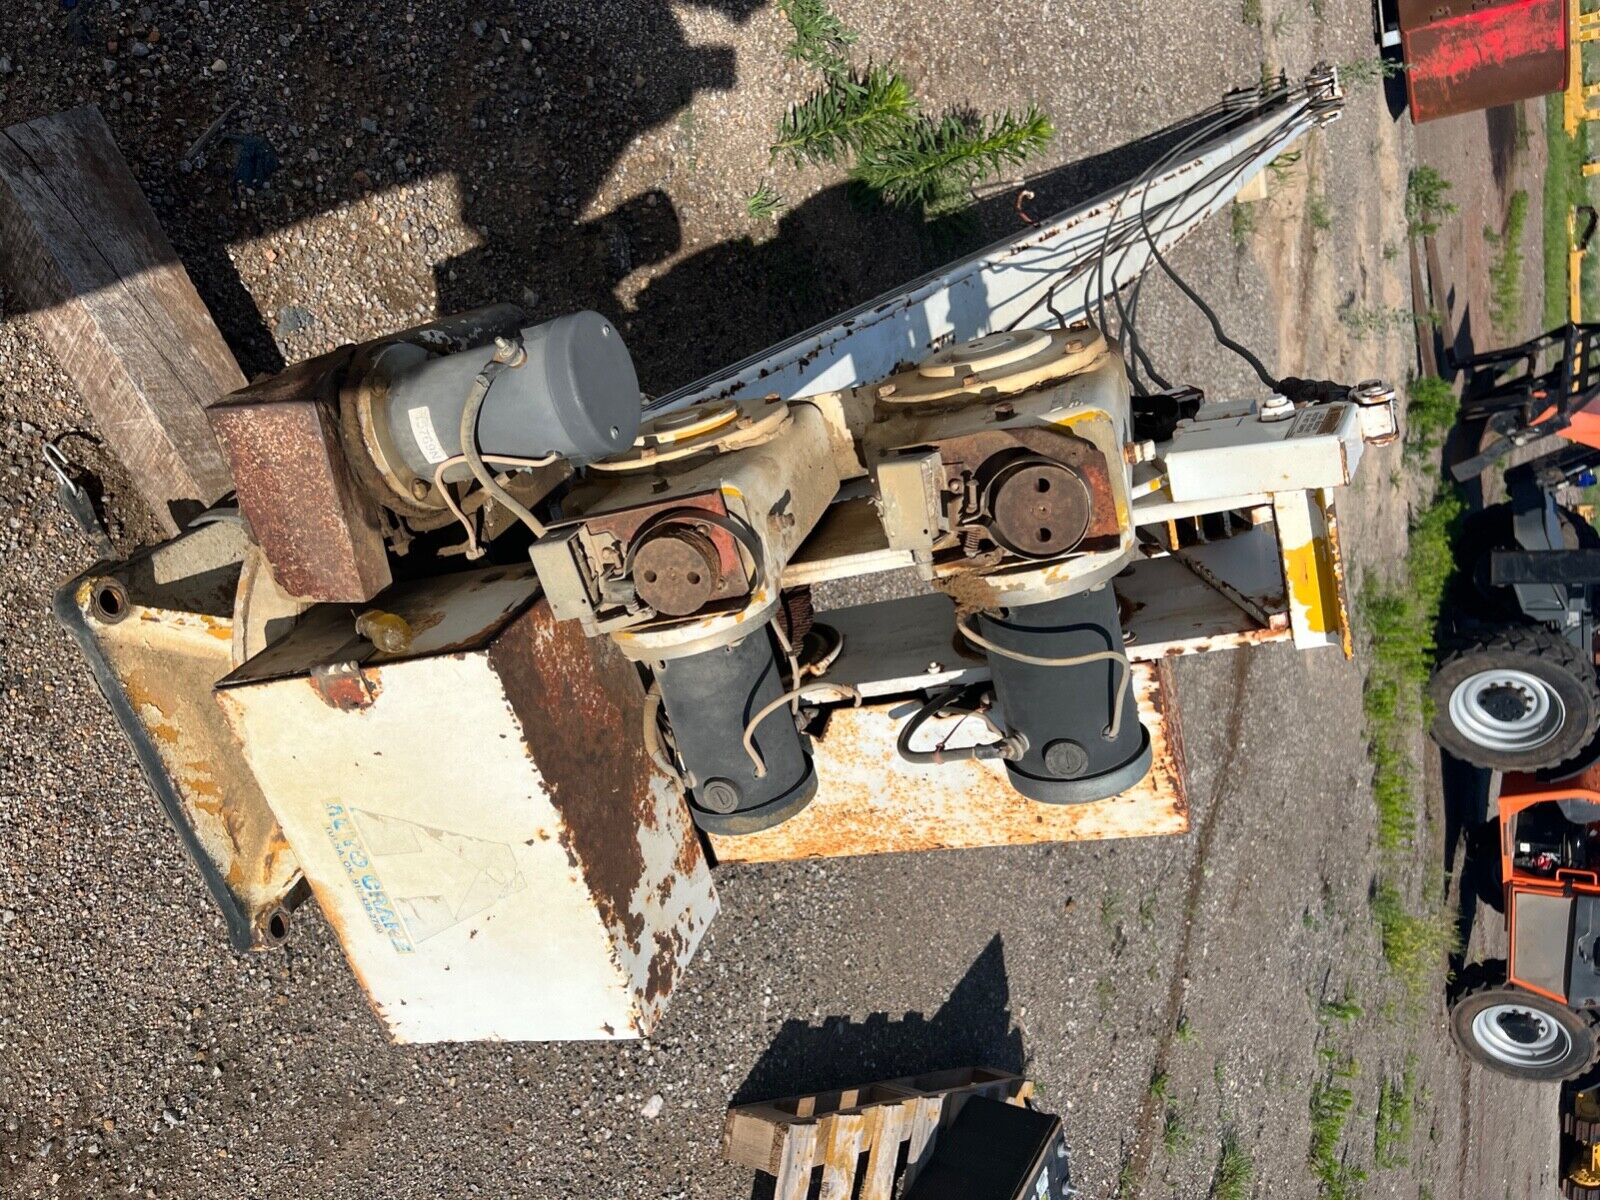 Auto Crane 17 Ft Good Condition Does Work. Turntable Is In Great Condition